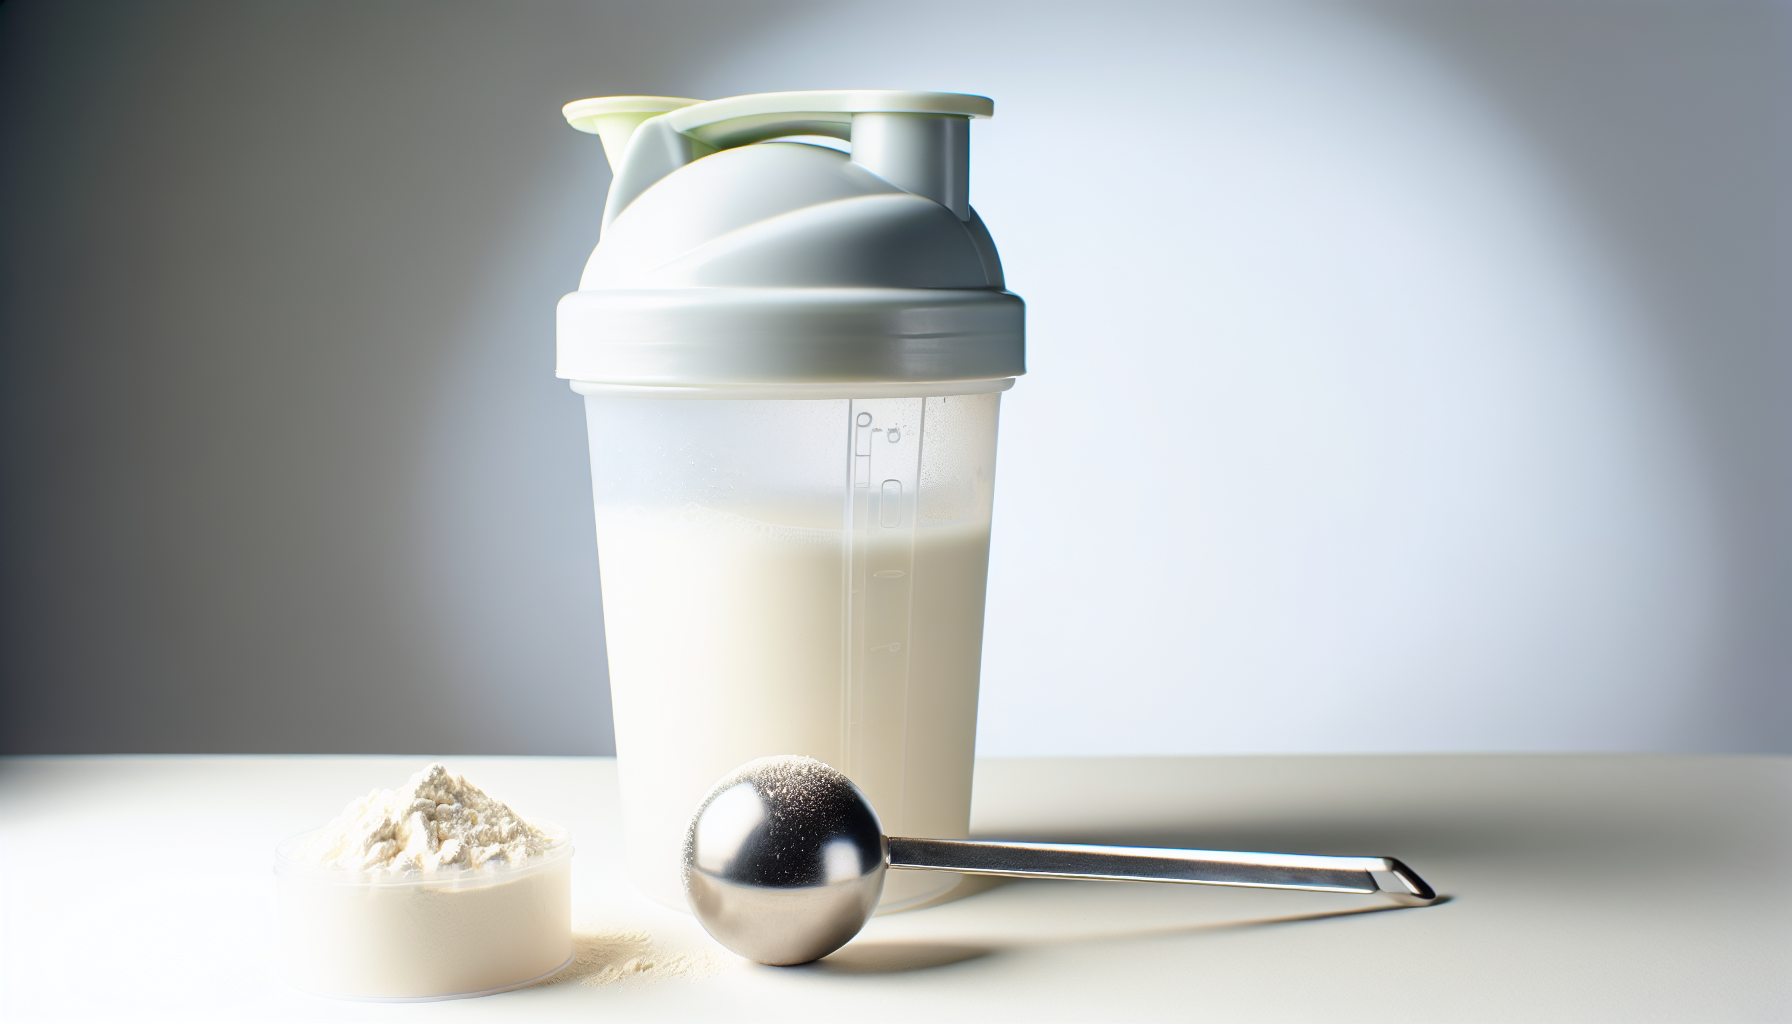 Whey protein powder and shaker, supplements to build muscle